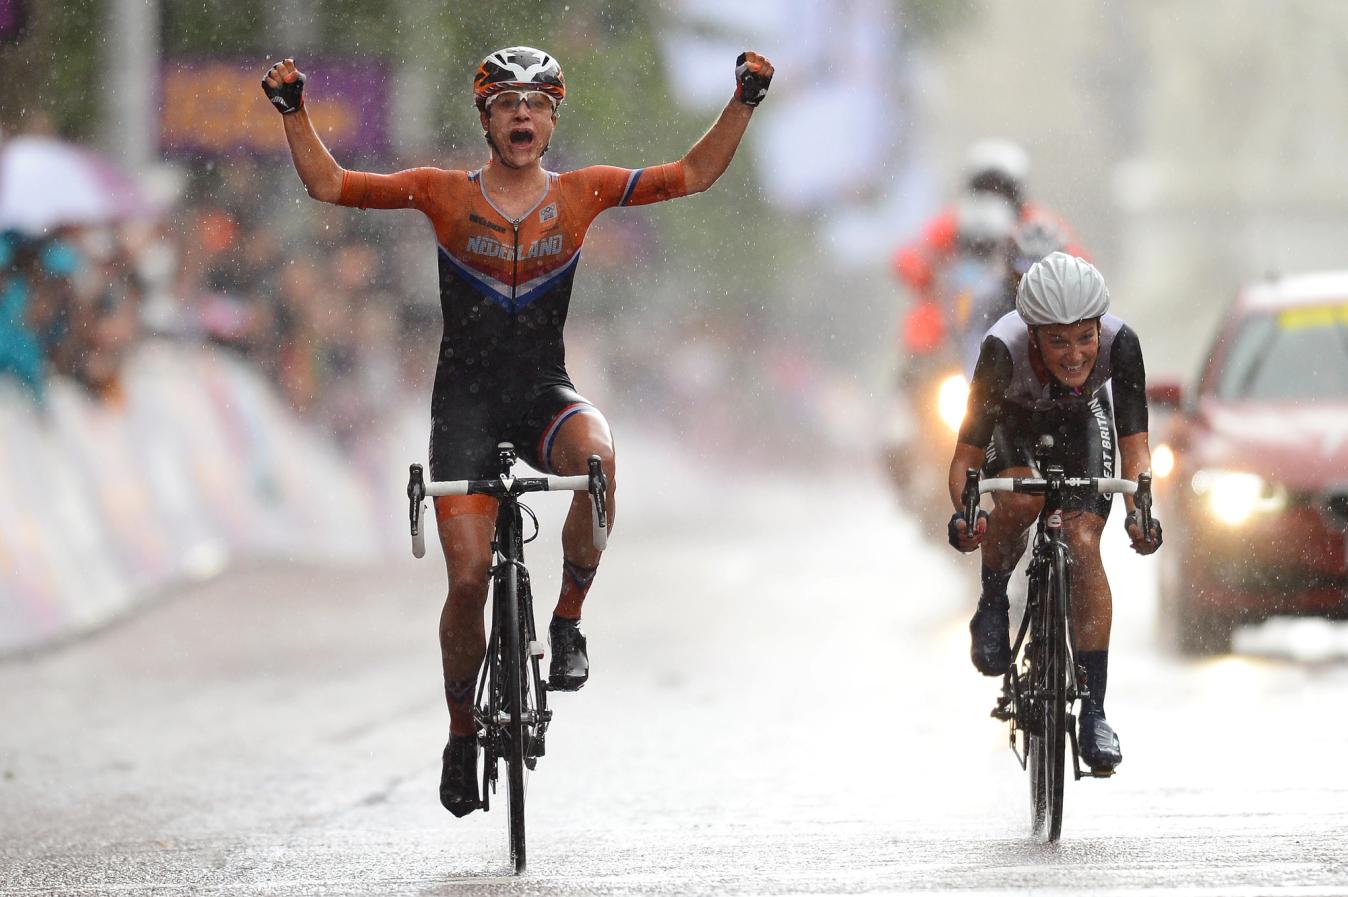 Marianne Vos winning the London 2012 Olympic road race ahead of Lizzie Deignan